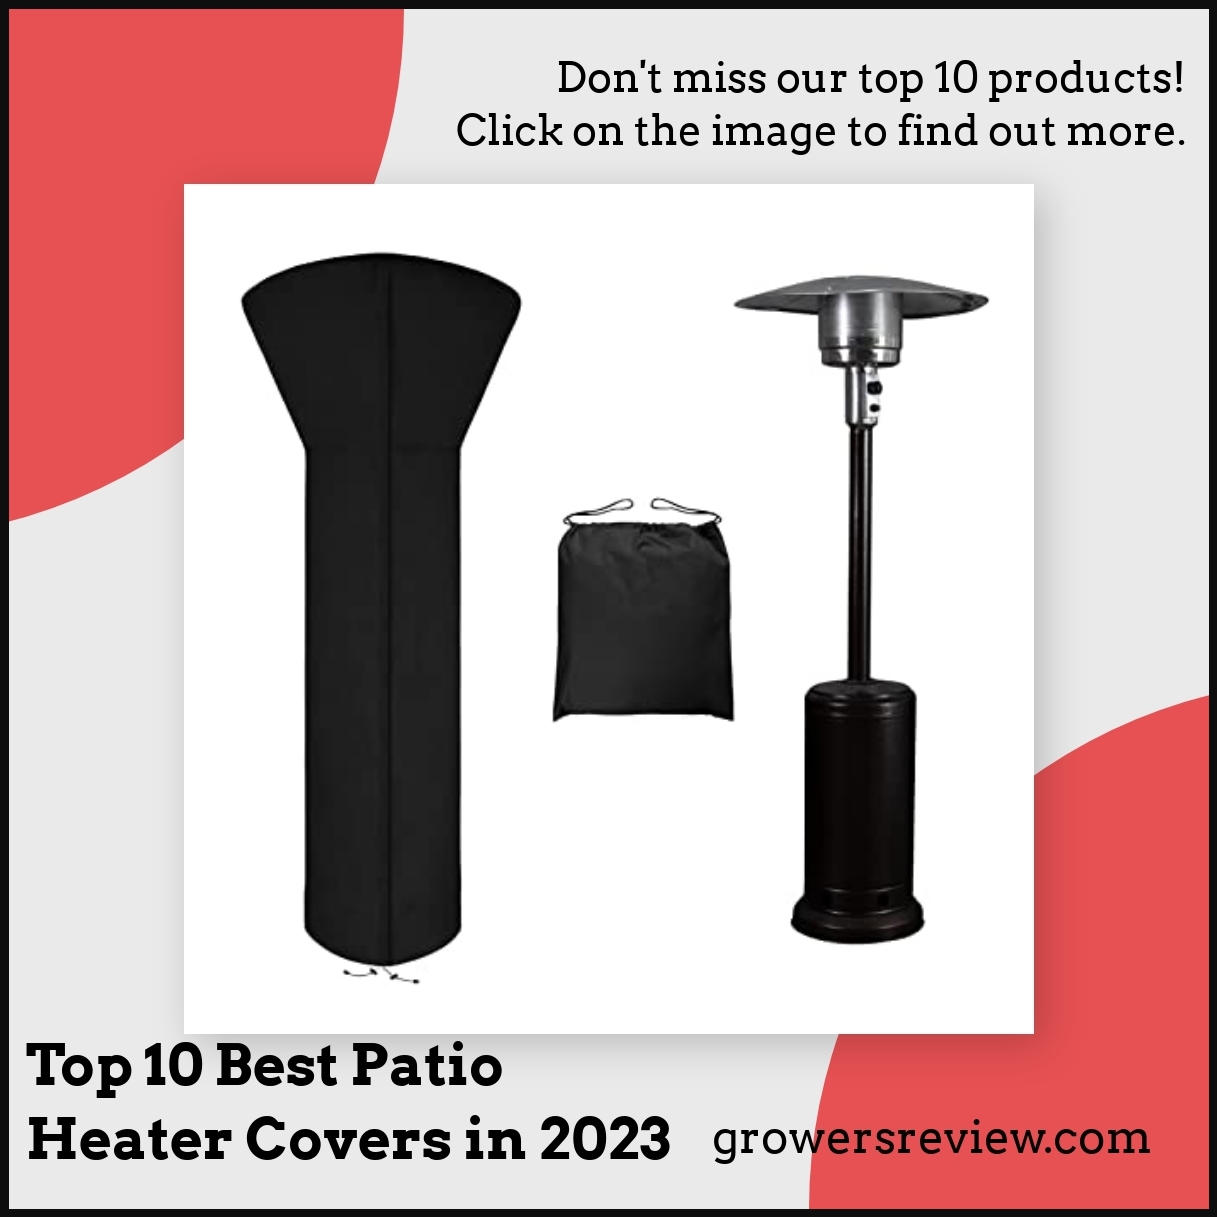 Top 10 Best Patio Heater Covers in 2023